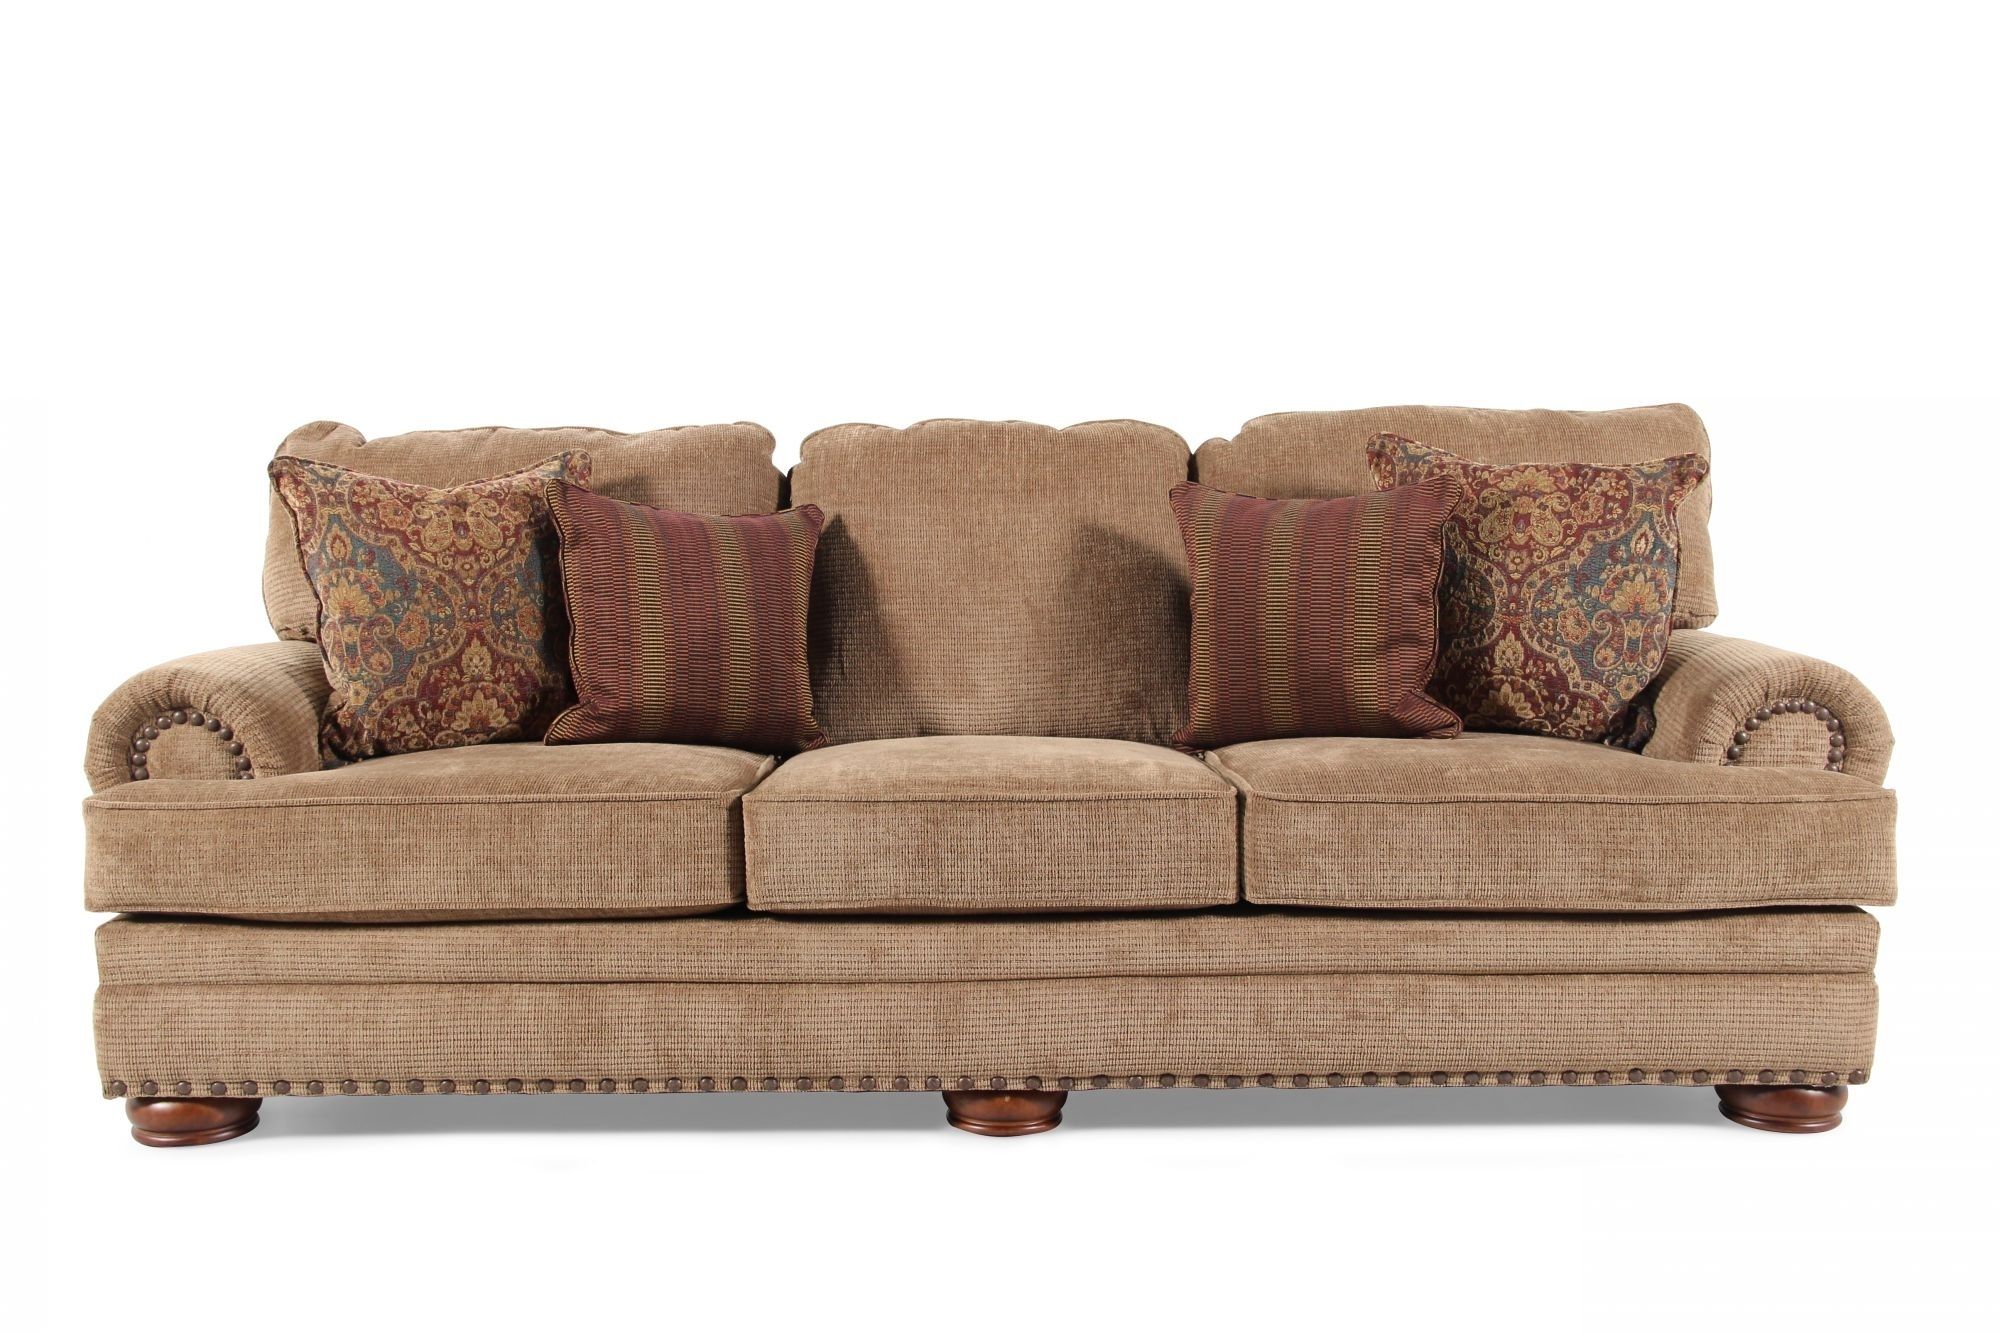 Mathis Brothers Living Room Furniture Sofas | Living Room Decor Throughout Mathis Brothers Sectional Sofas (View 2 of 10)